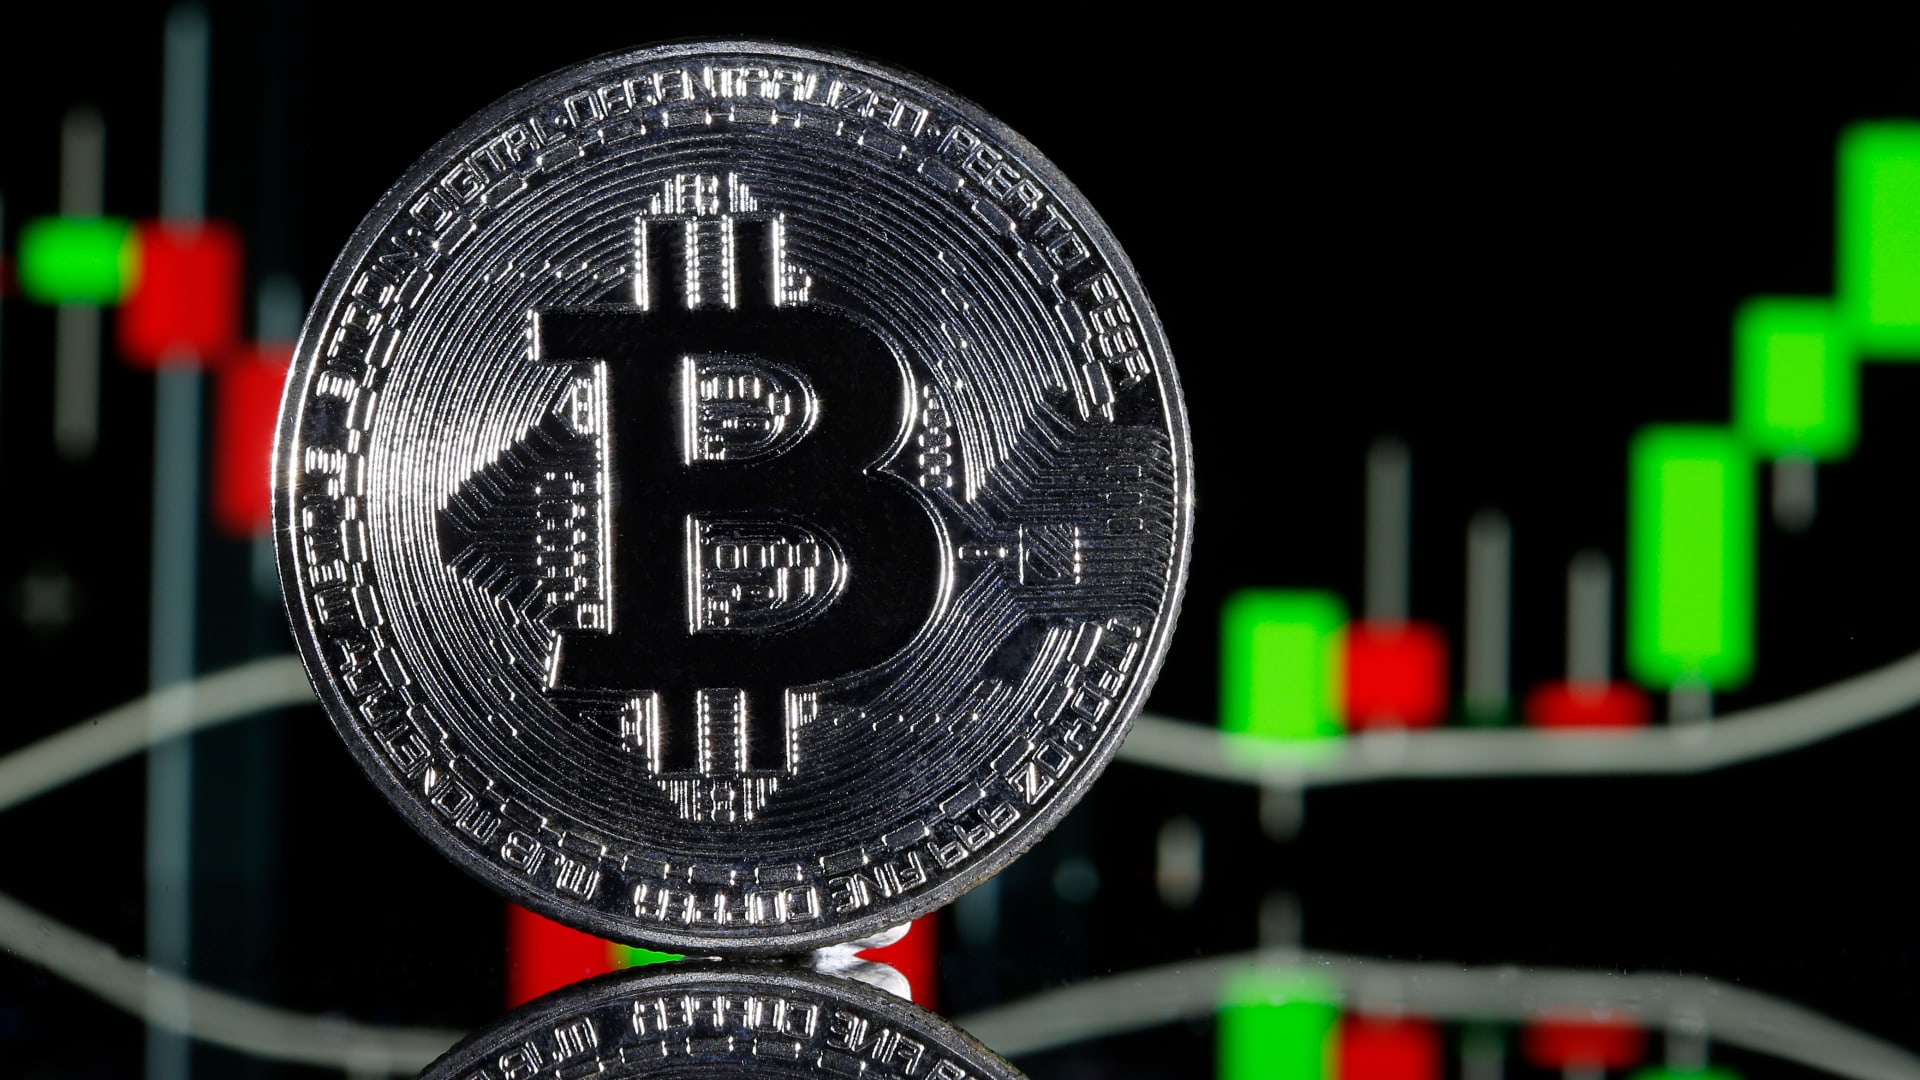 Bitcoin's chart shows a new cycle is taking hold and investors should make use of current sluggishness, says Canaccord Genuity 